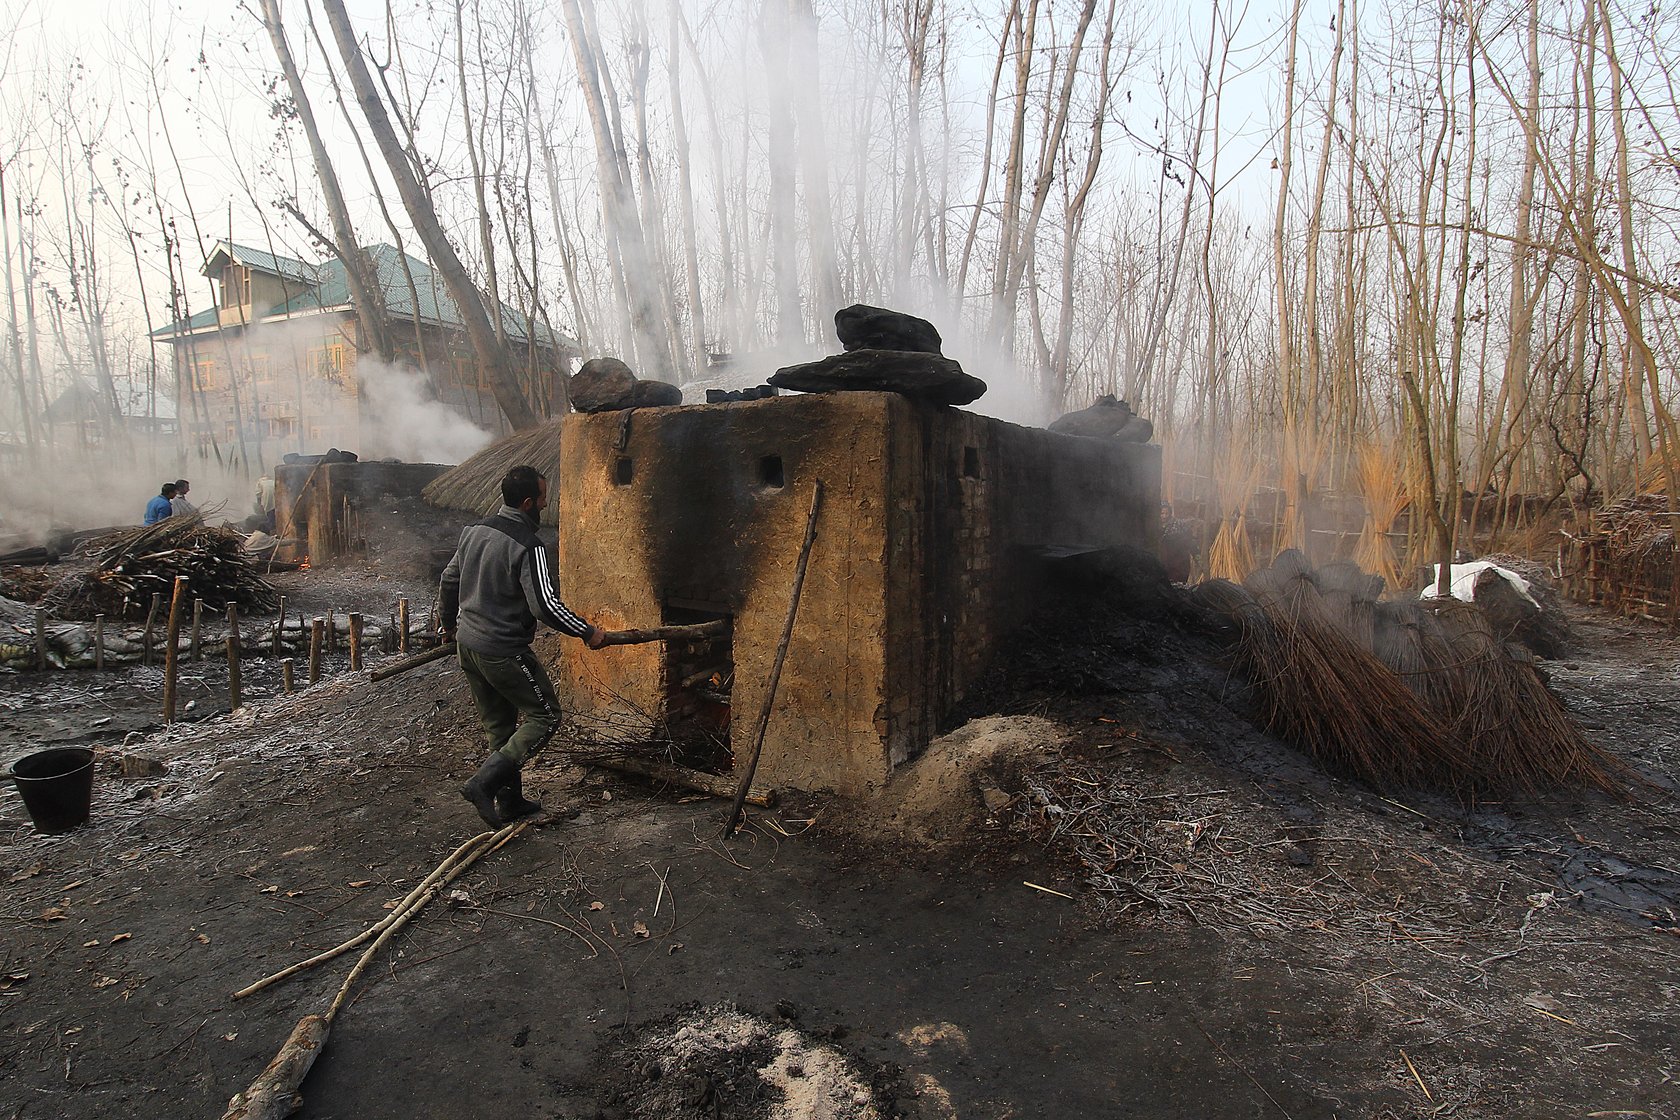 Waseem Ahmad, 32, a resident of Umerhere, fills firewood in the oven in which the wicker is to be boiled overnight